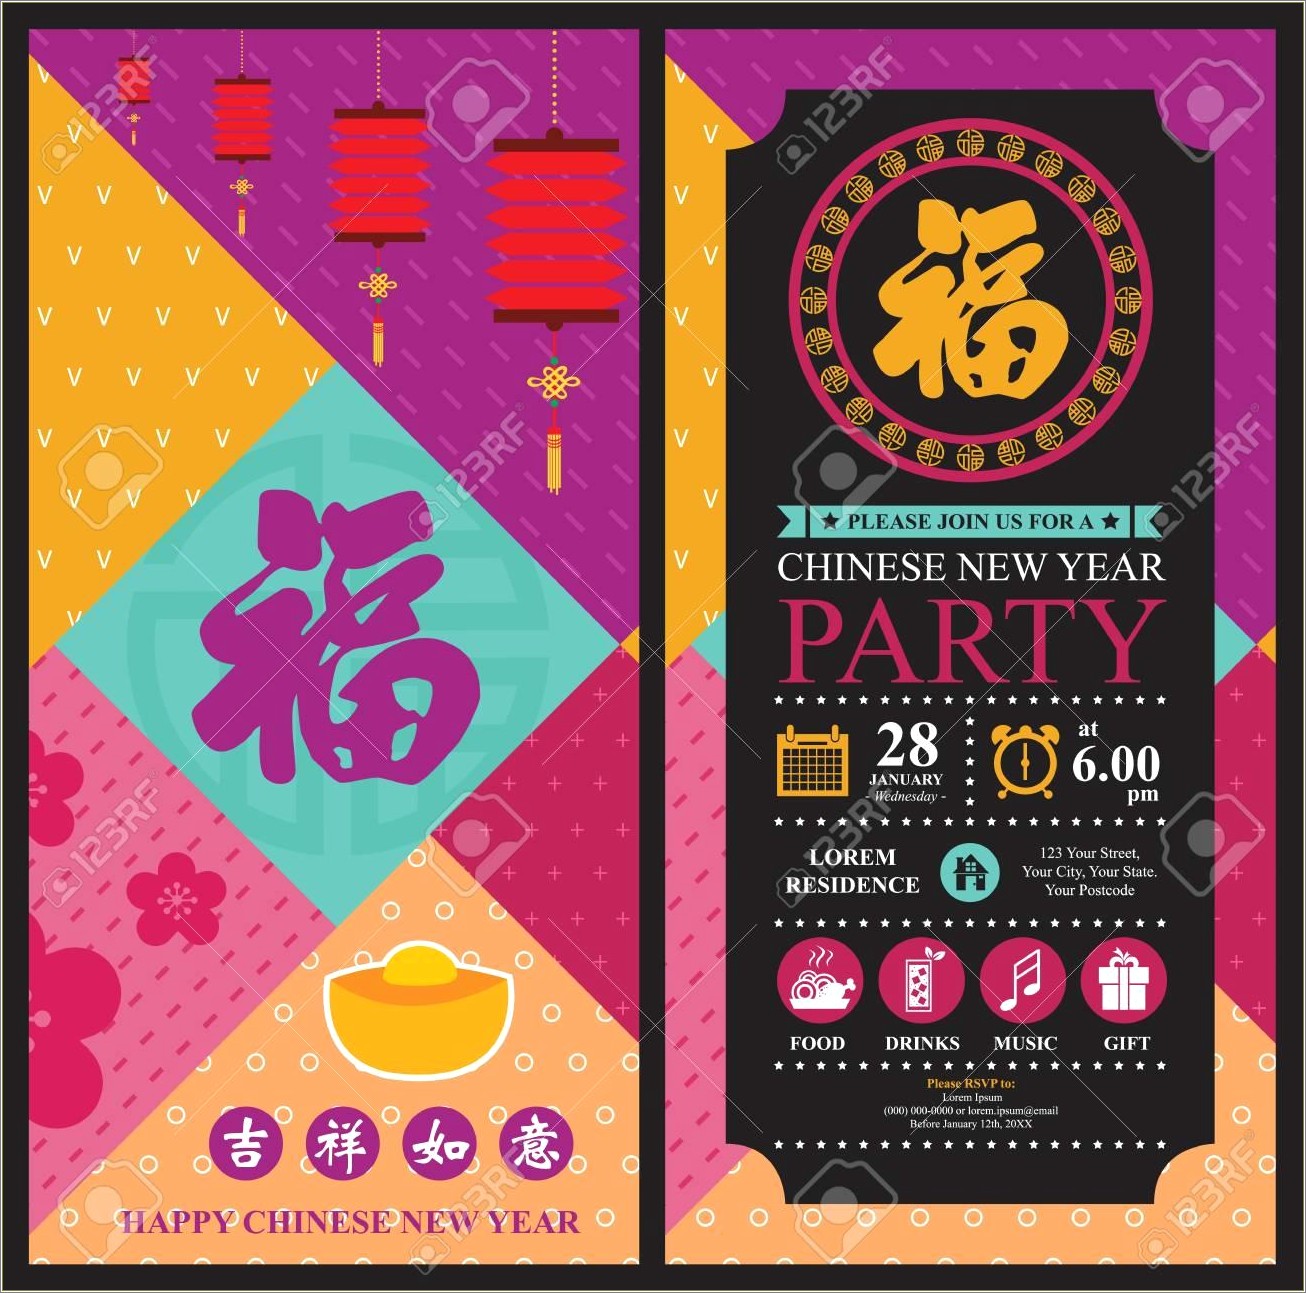 2015 Chinese New Year Invitation Template Free